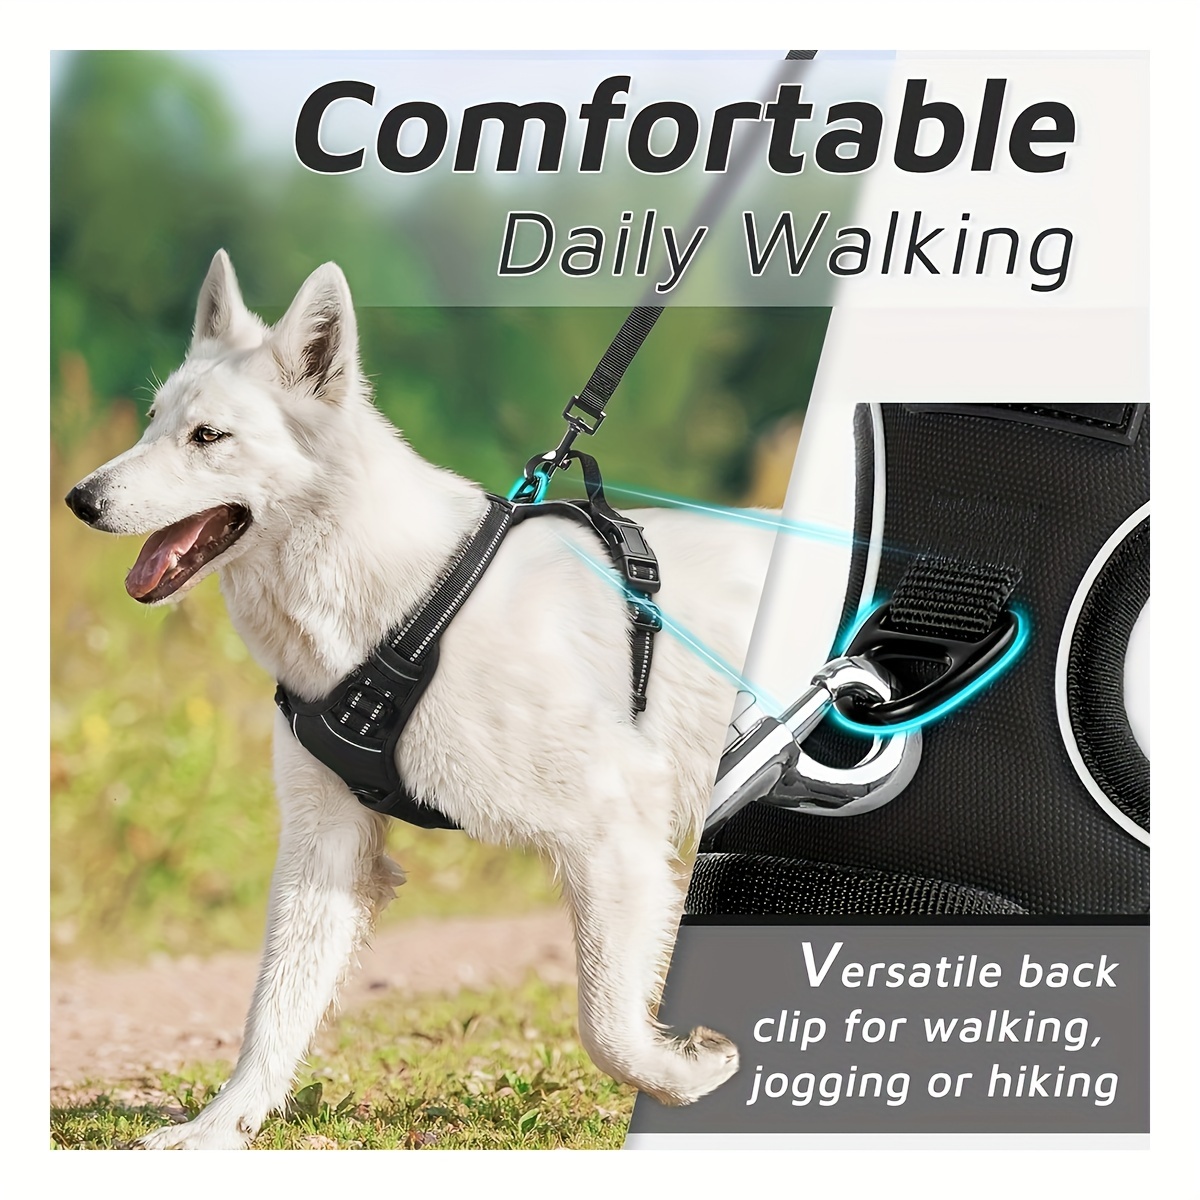 

Dog Harness For Large Dogs, No Pull Service Vest With Reflective Strips And Control Handle, Adjustable And Comfortable For Easy Walking, No Choke Pet Harness With 2 Metal Rings